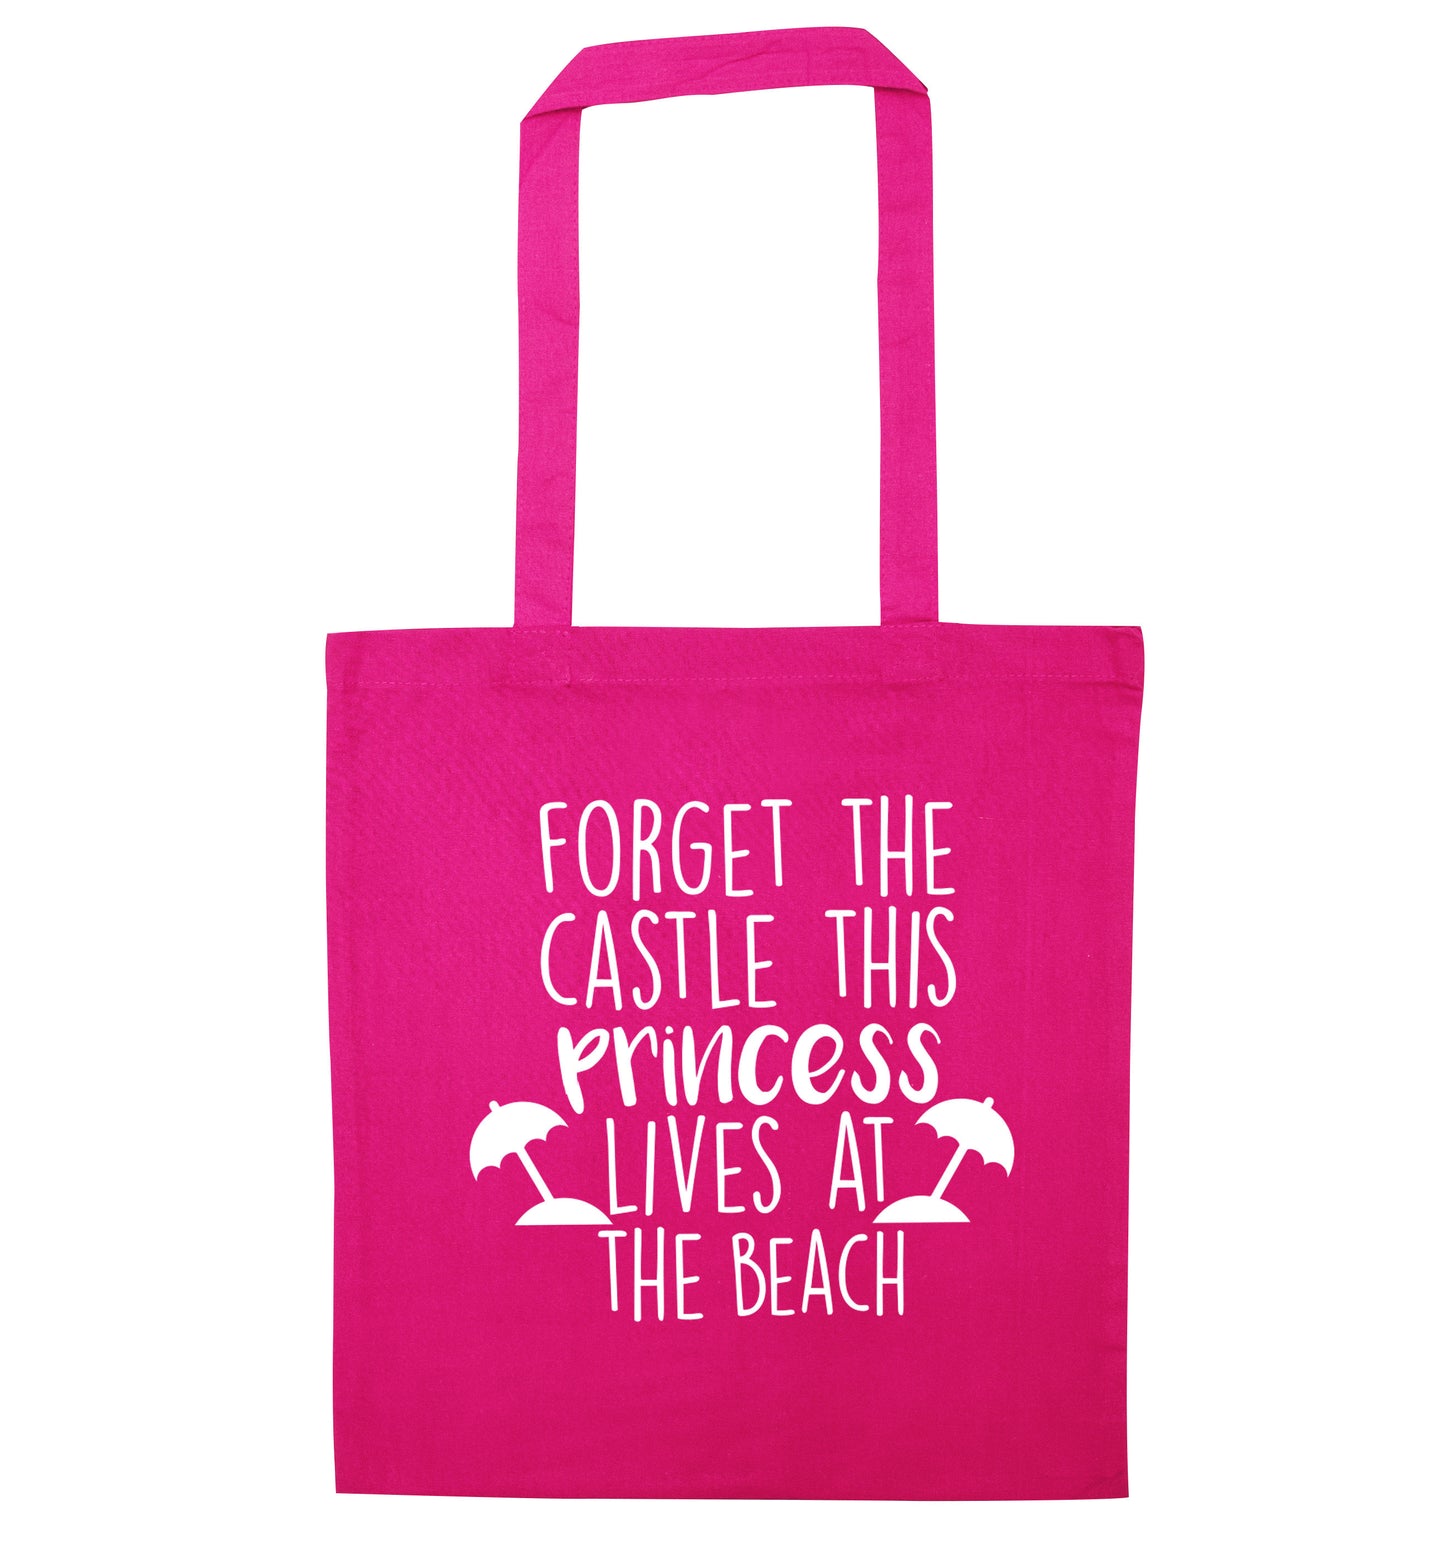 Forget the castle this princess lives at the beach pink tote bag